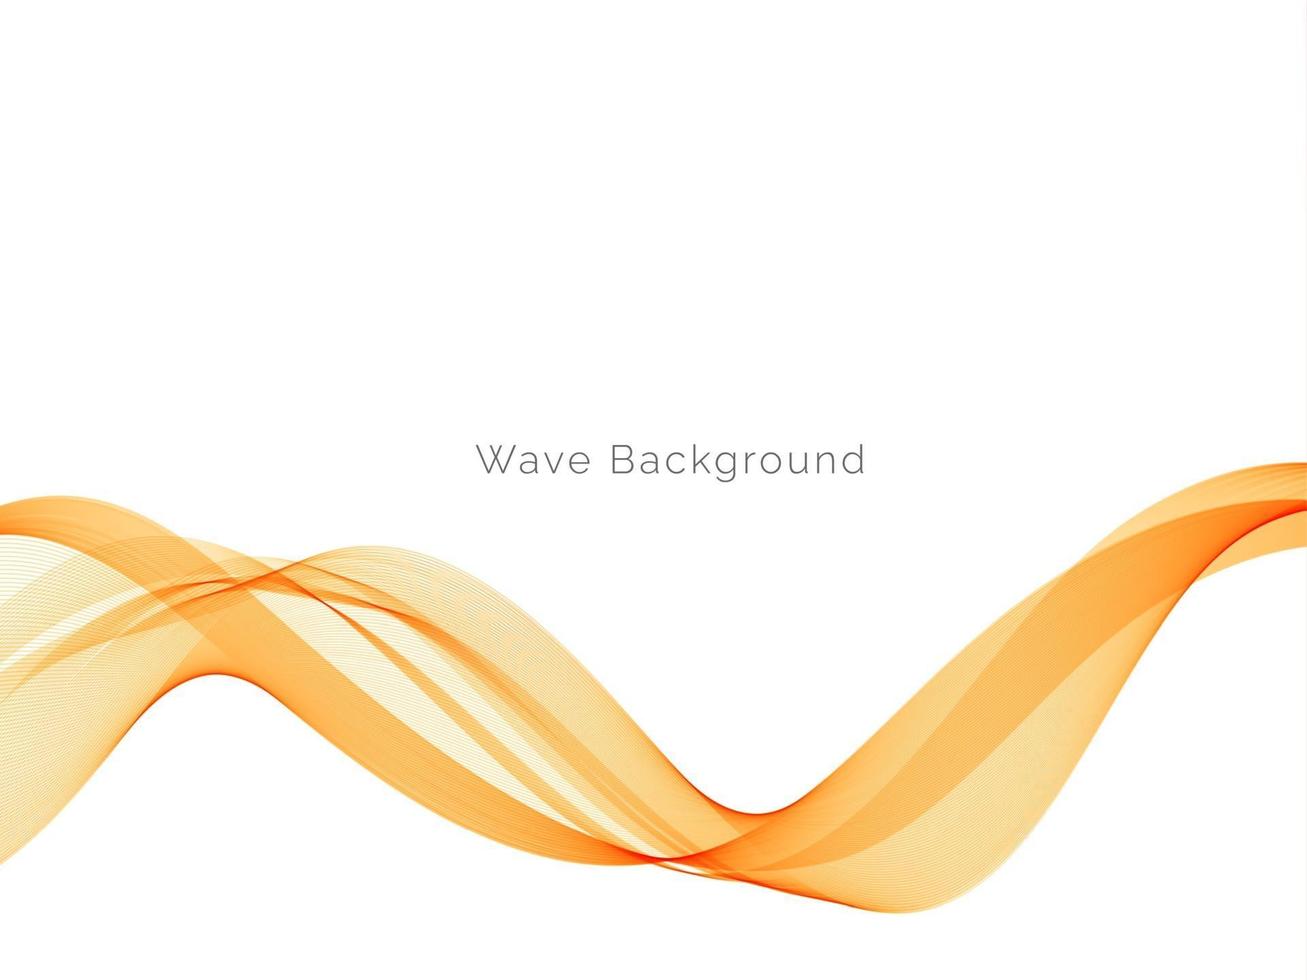 Decorative design modern pattern with stylish smooth yellow wave background vector